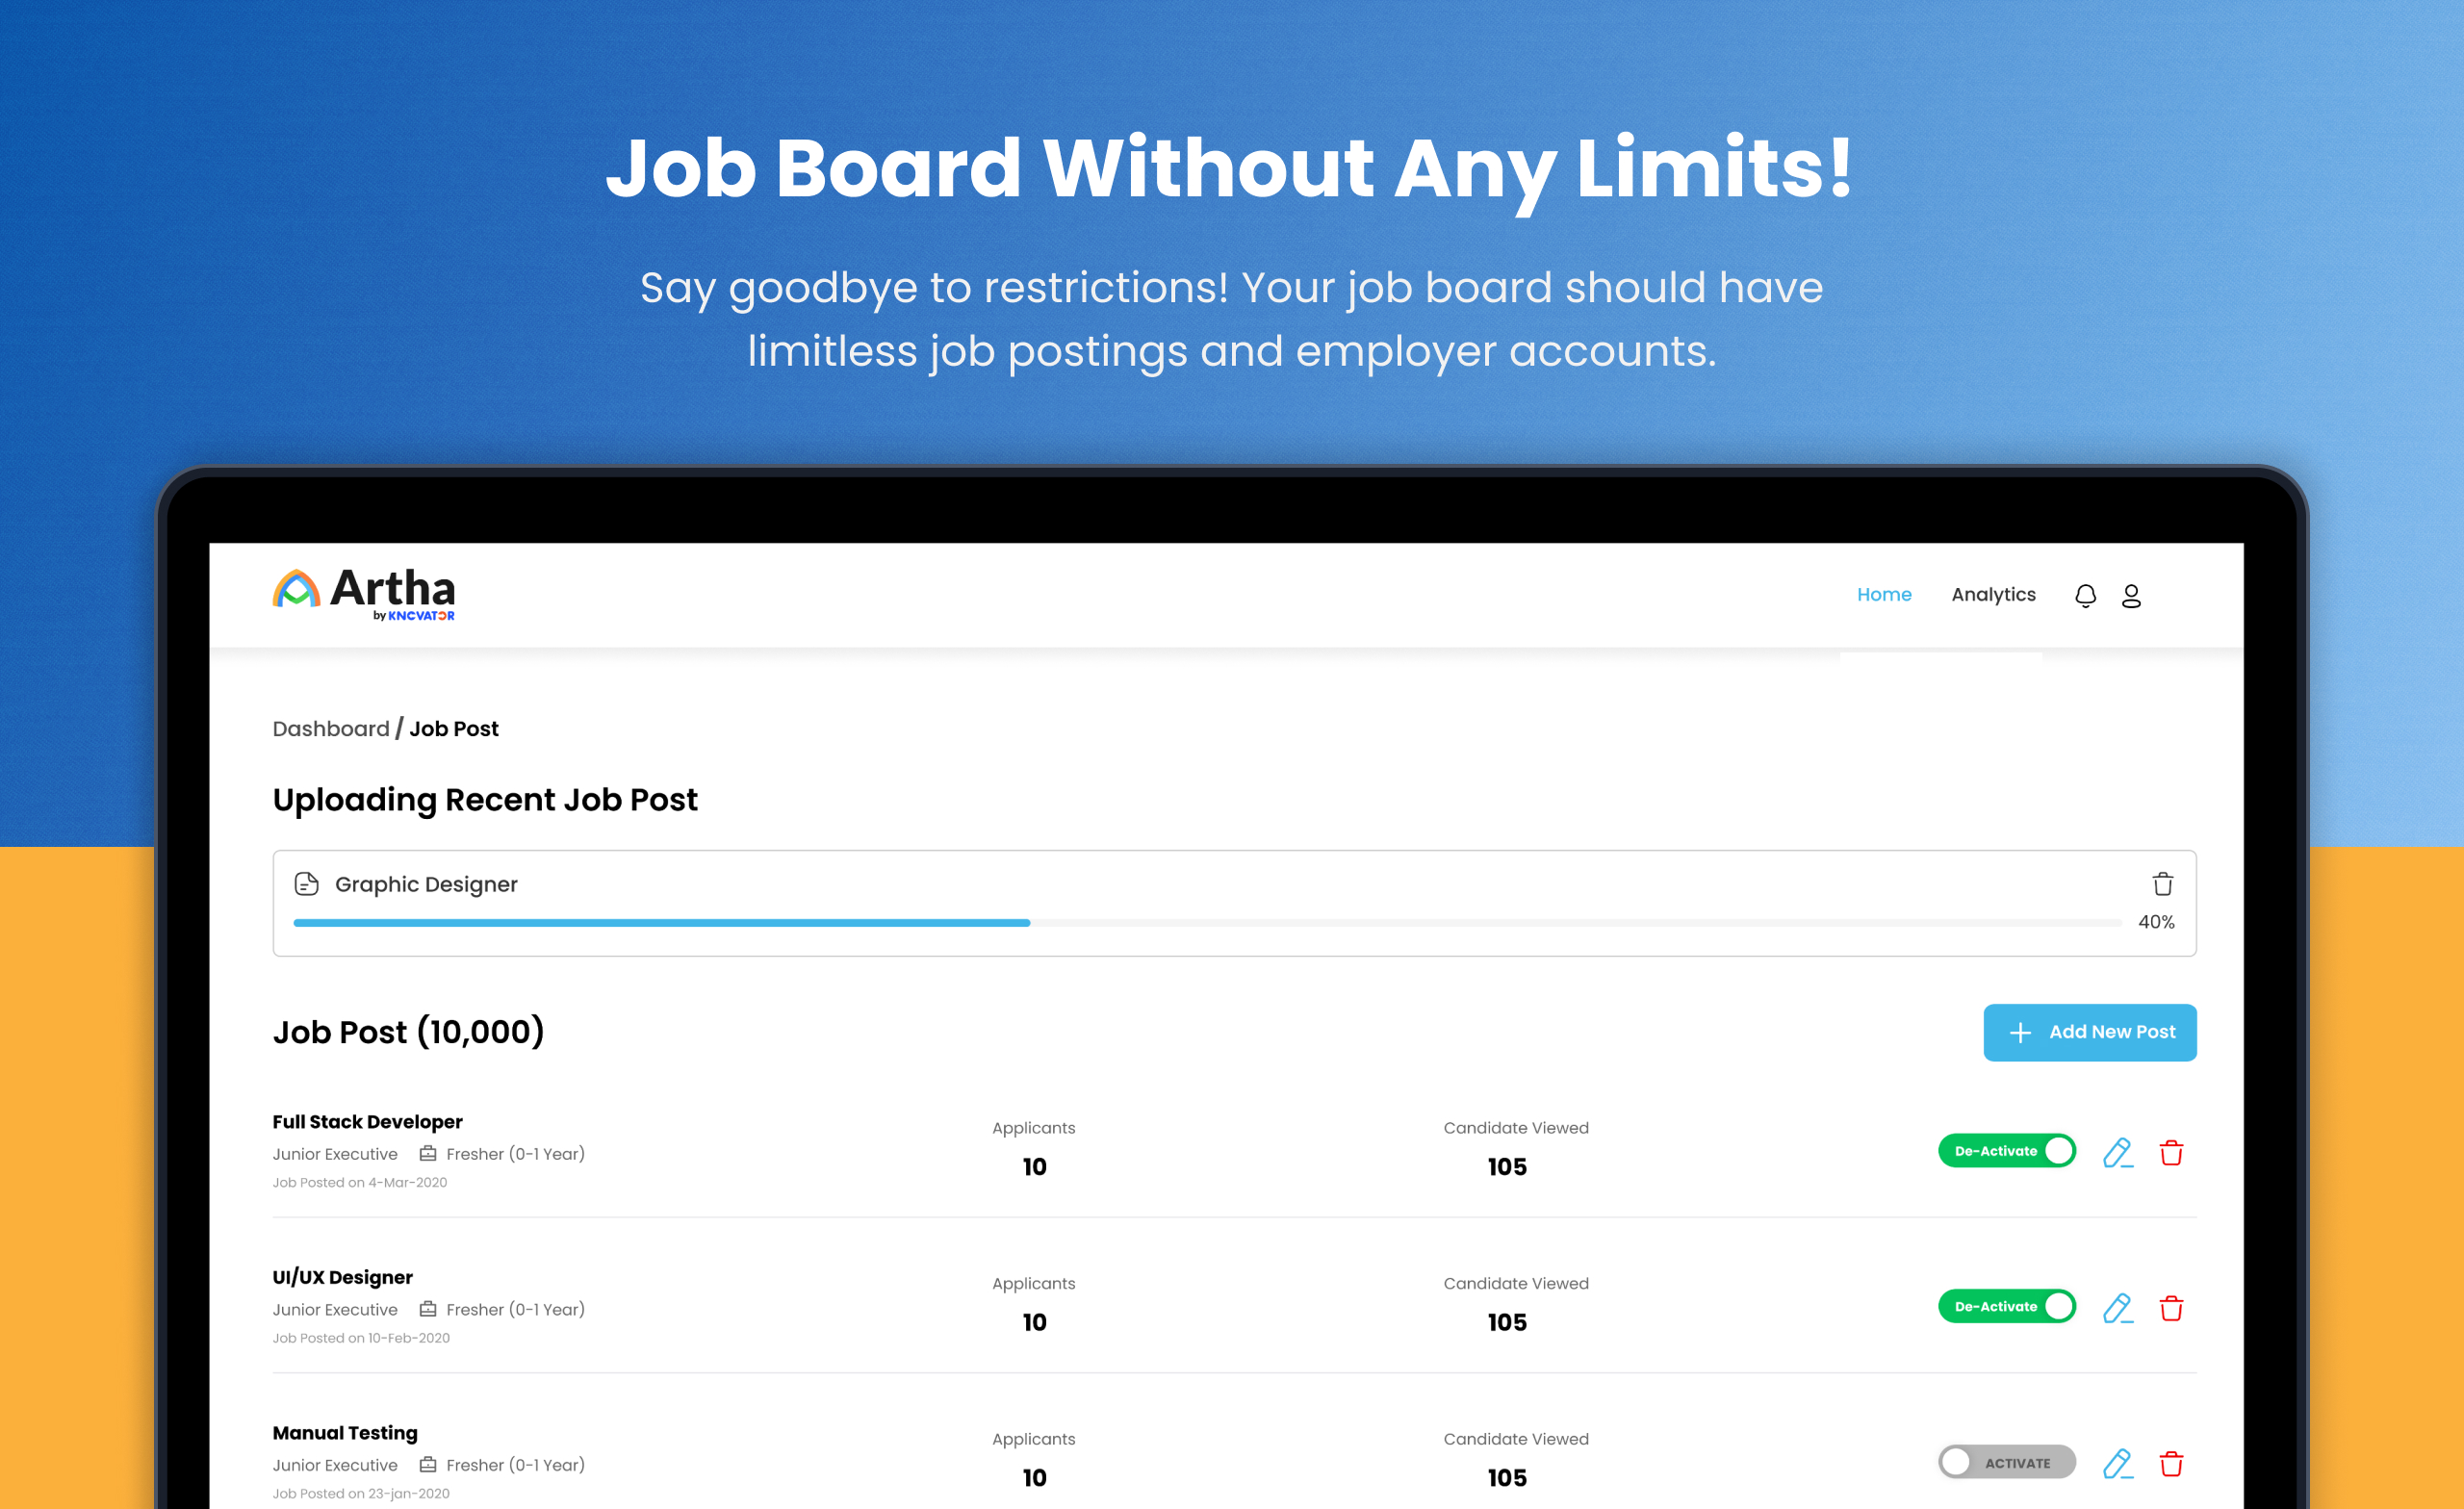 Job Board Without Any Limits!
Say goodbye to restrictions! Your job board should have limitless job postings and employer accounts.